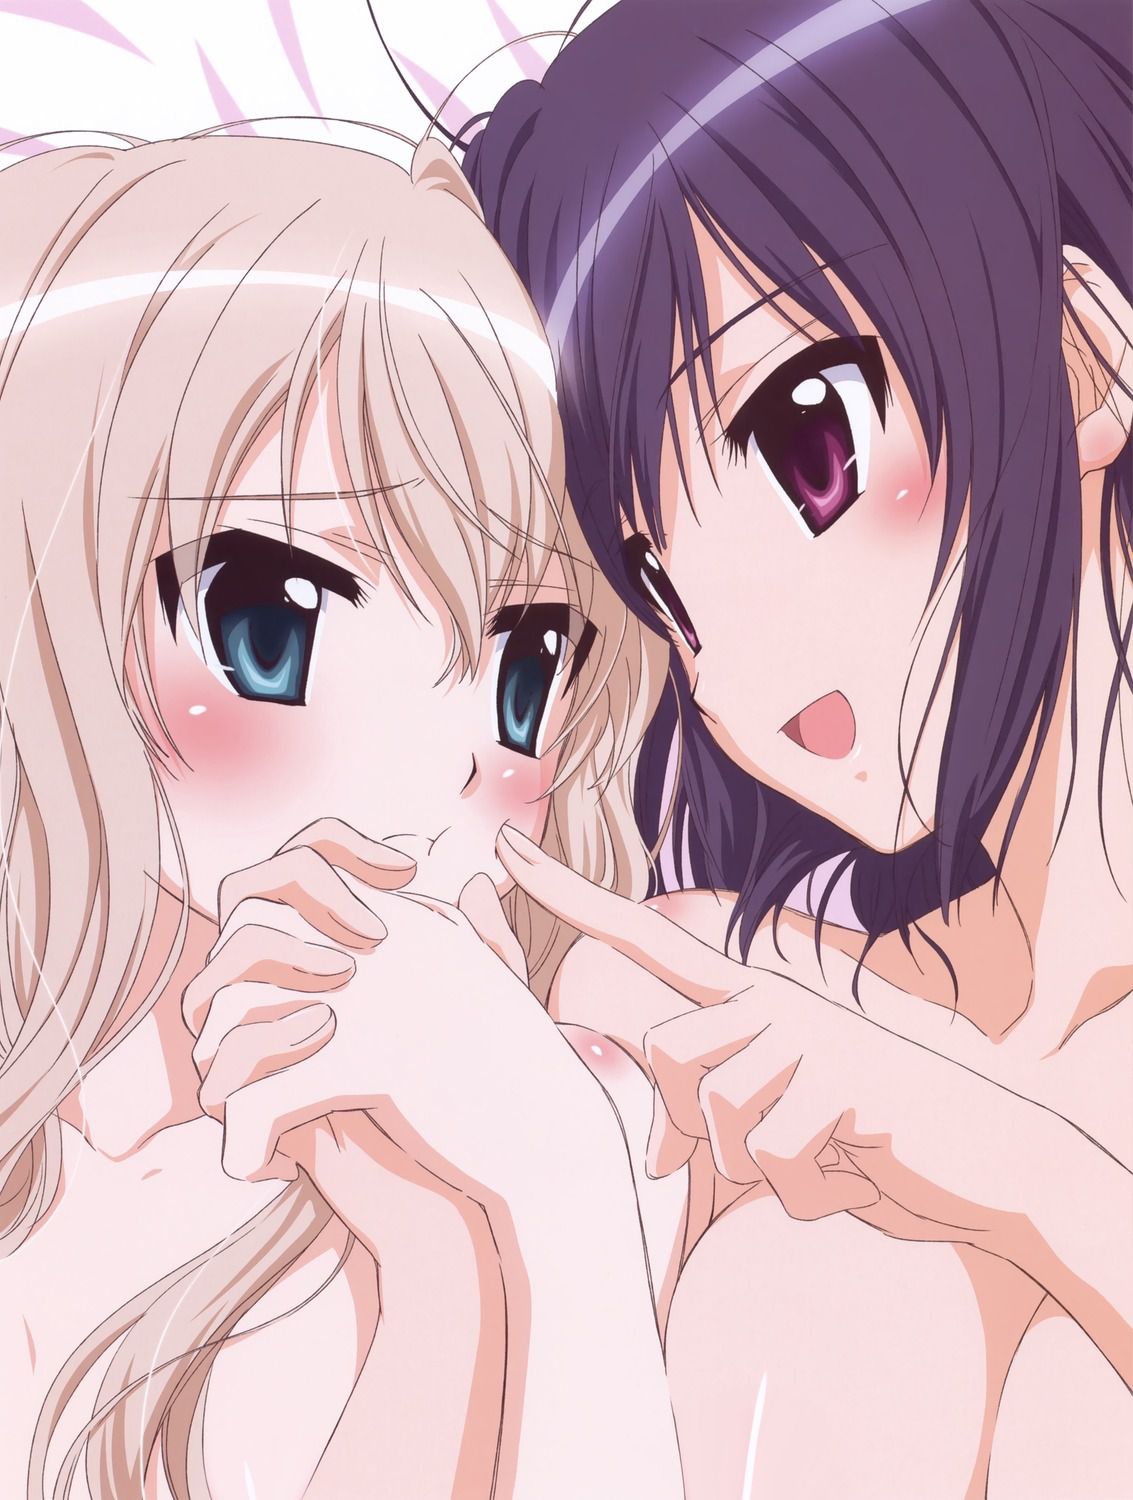 Yuri and Lesbian secondary image wwww to be naughty in girls each other 4 16